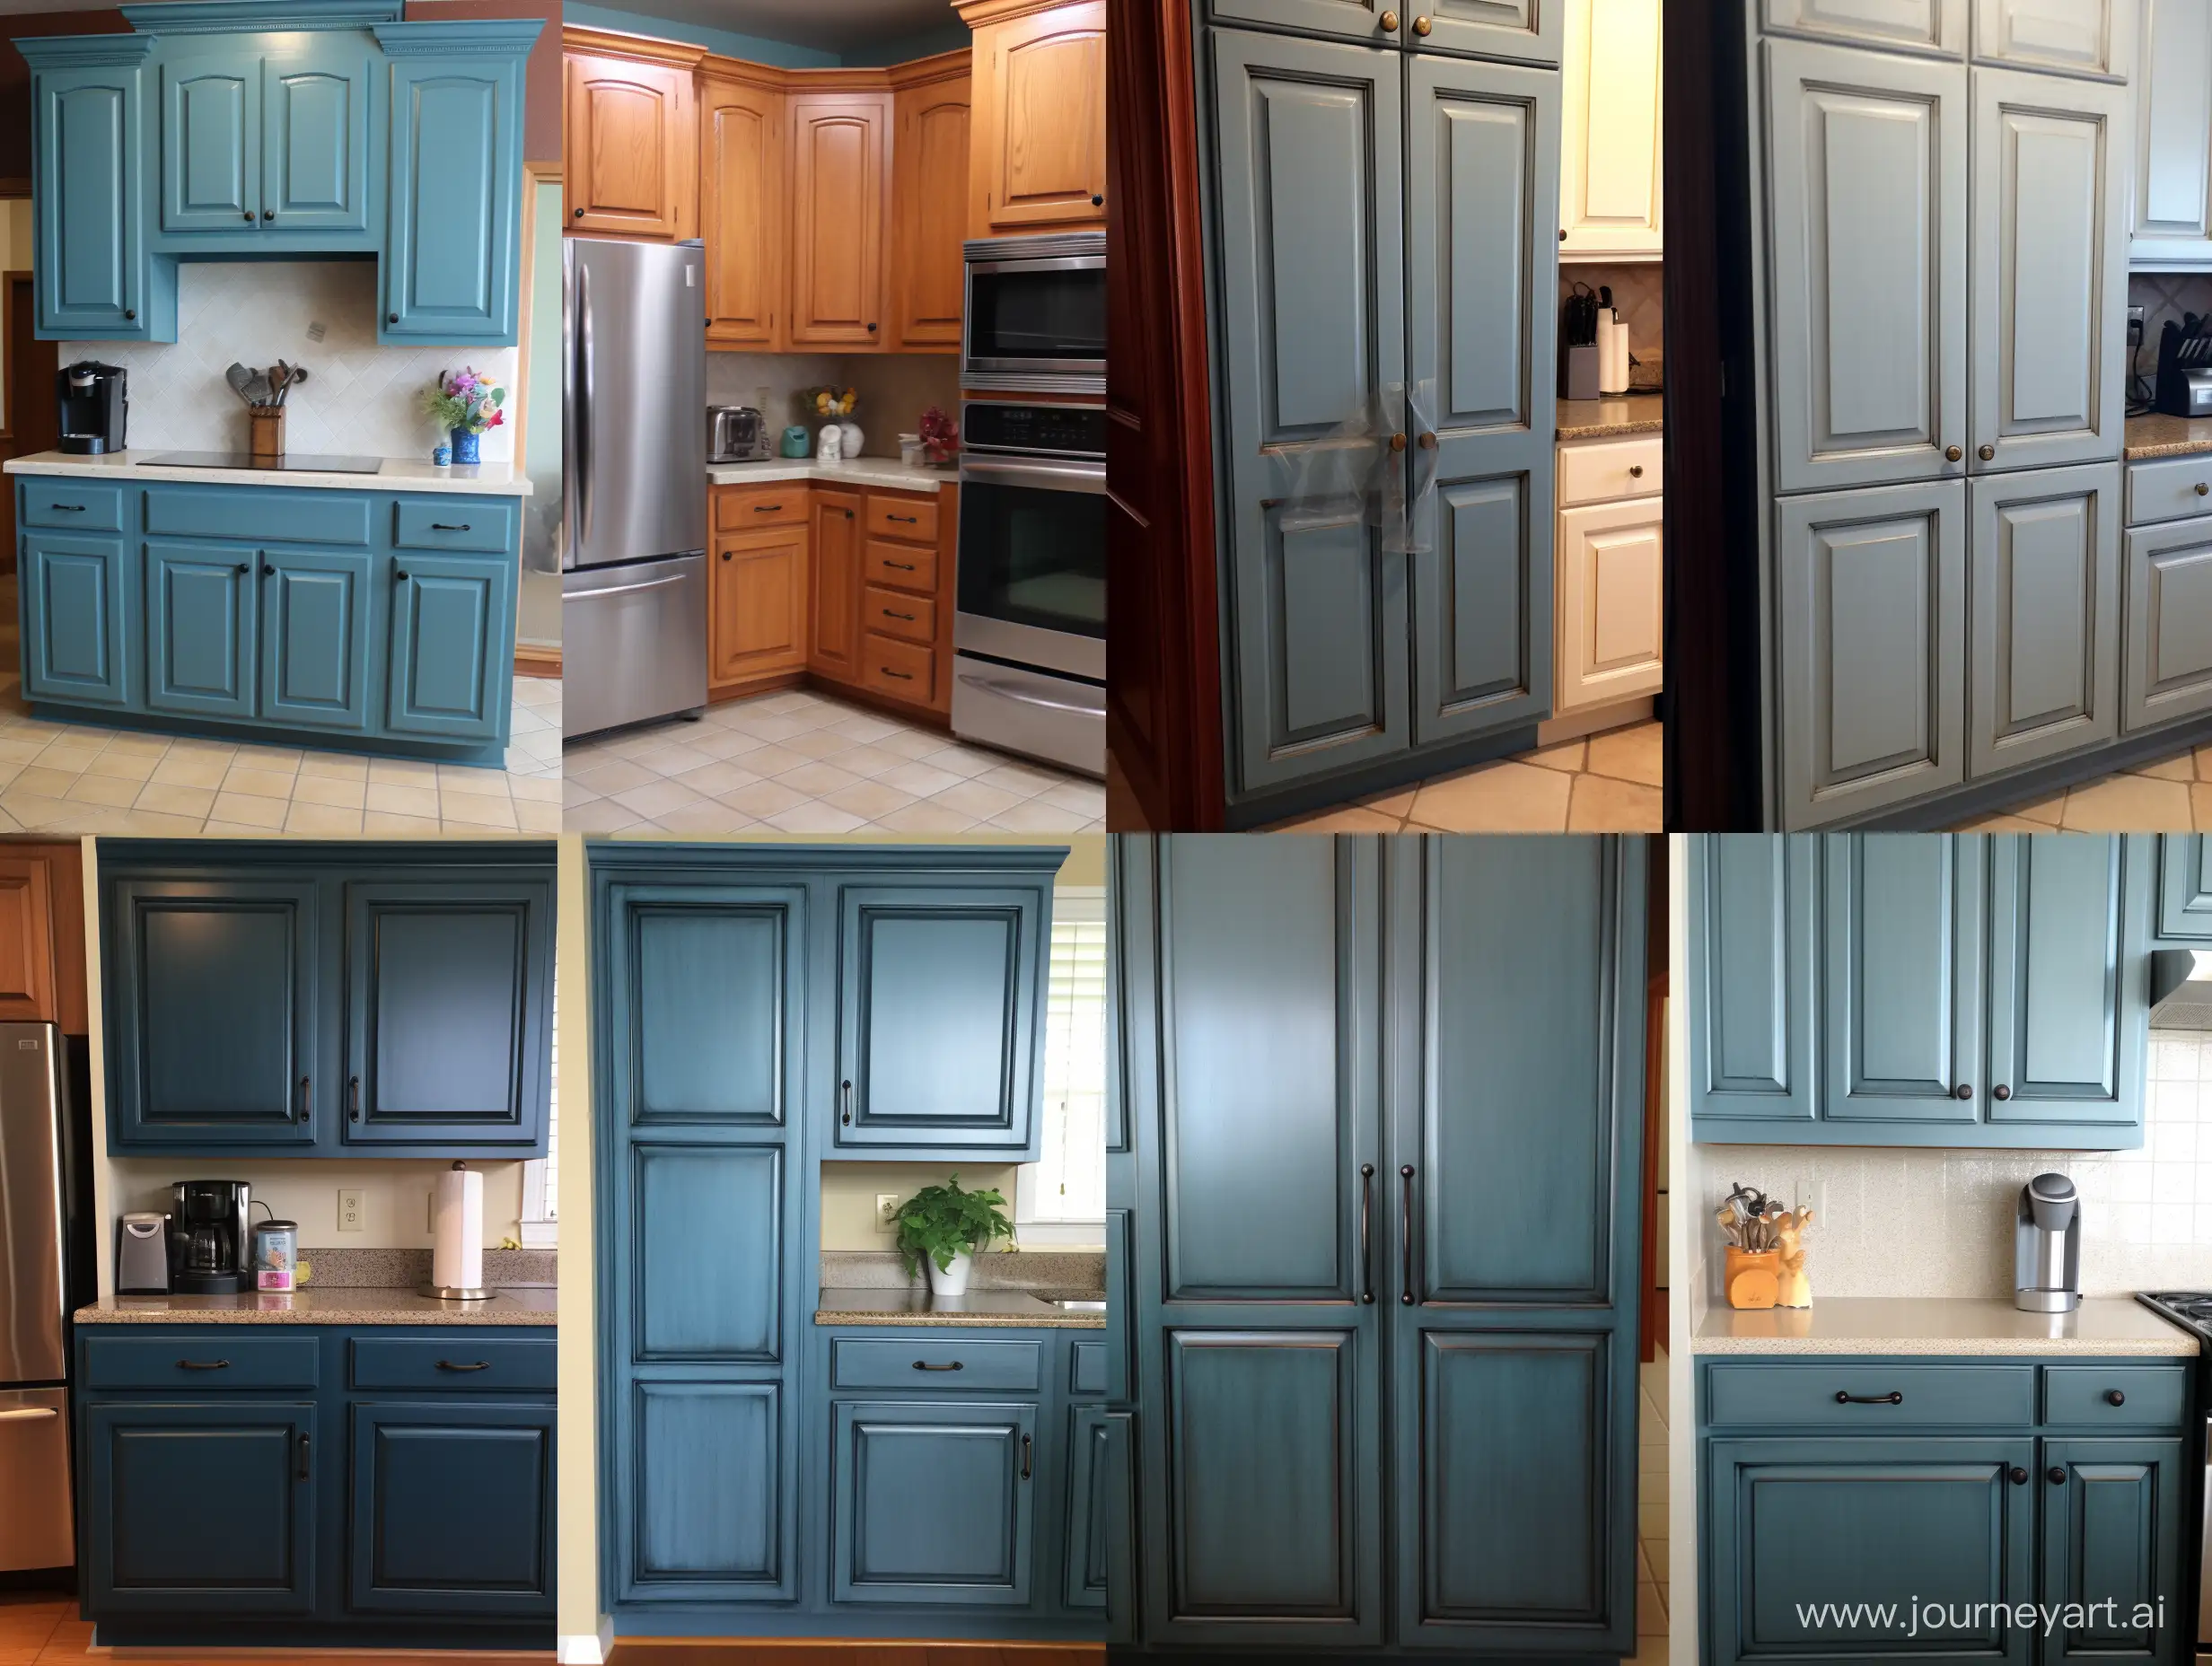 Painting blue kitchen cabinet doors: Before and after restoration